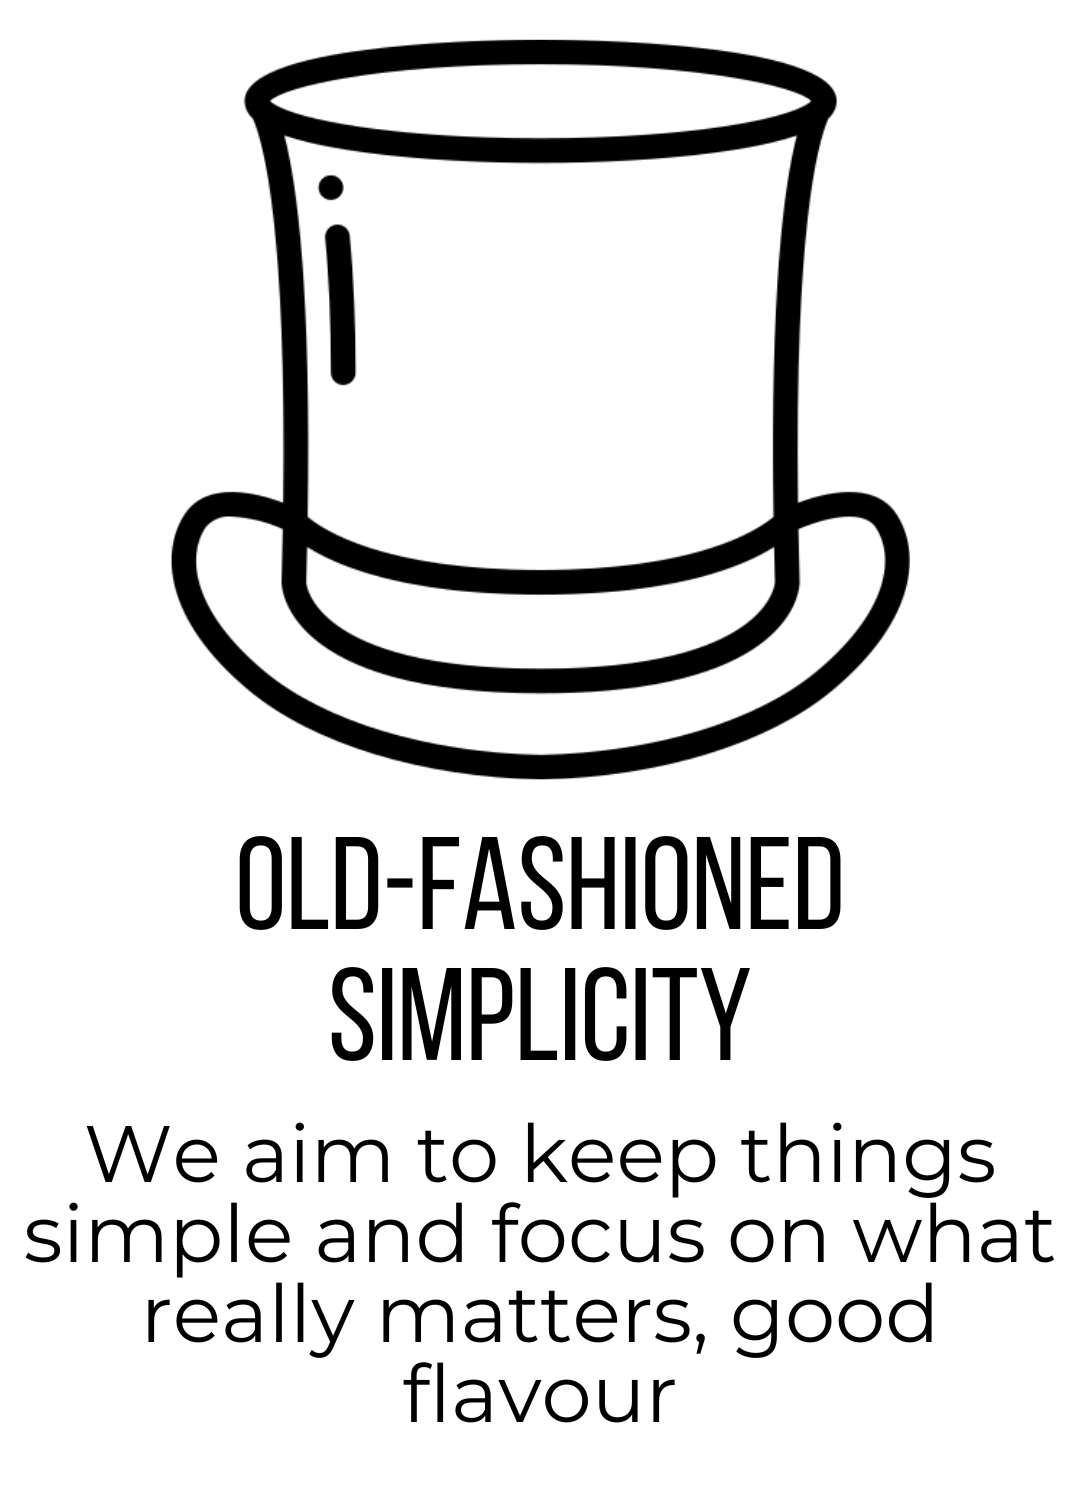 top hat with old fashioned simplicity